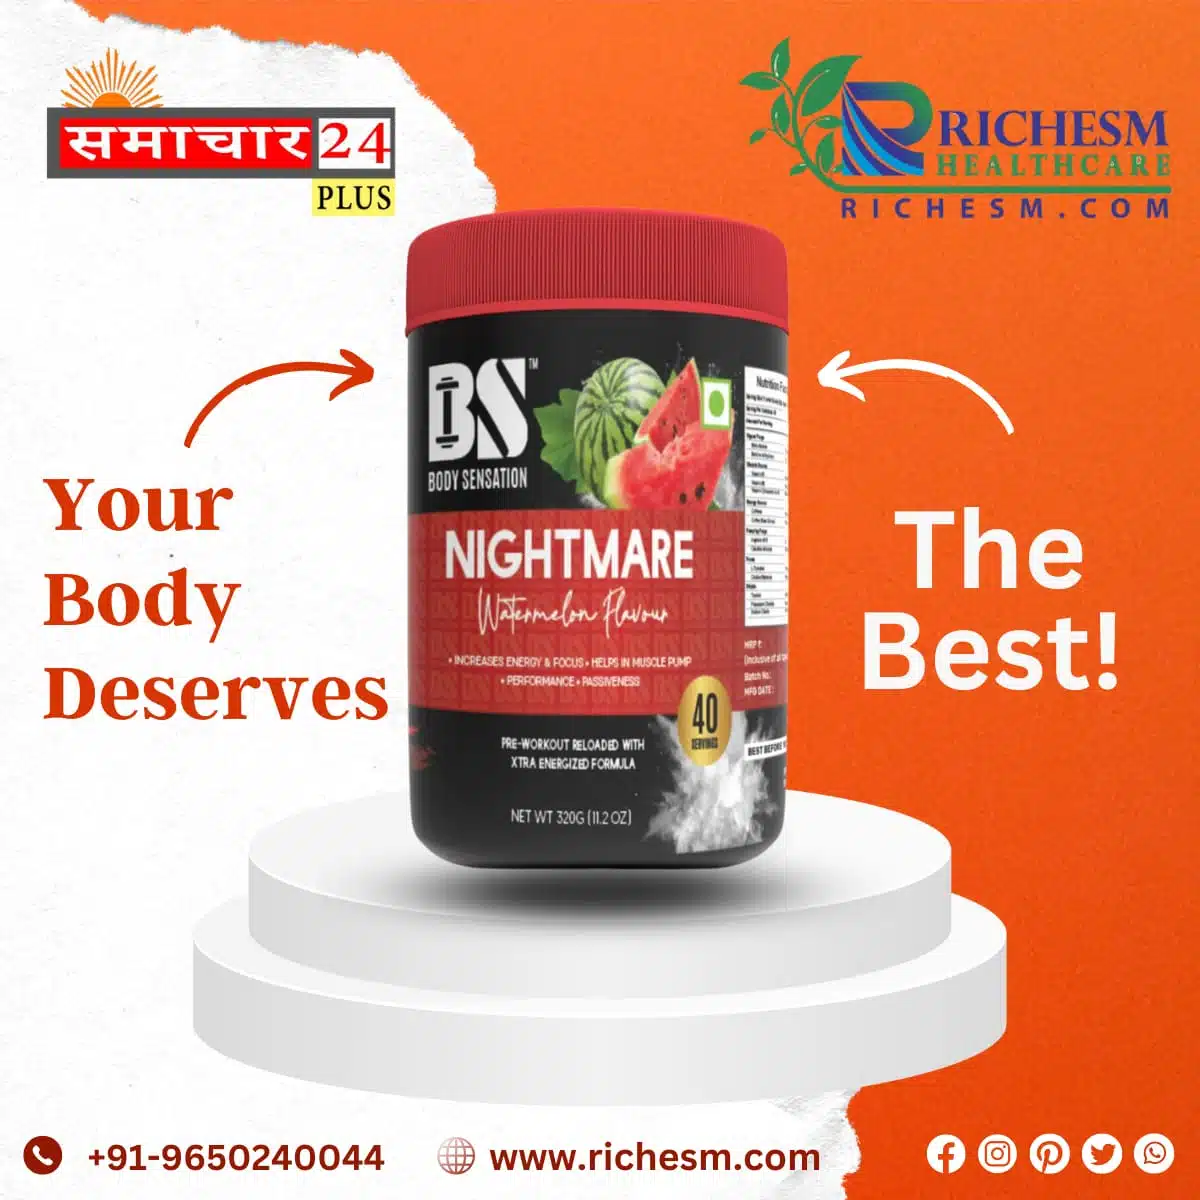 Try New Pre Work Out Of Body Sensation From RichesM